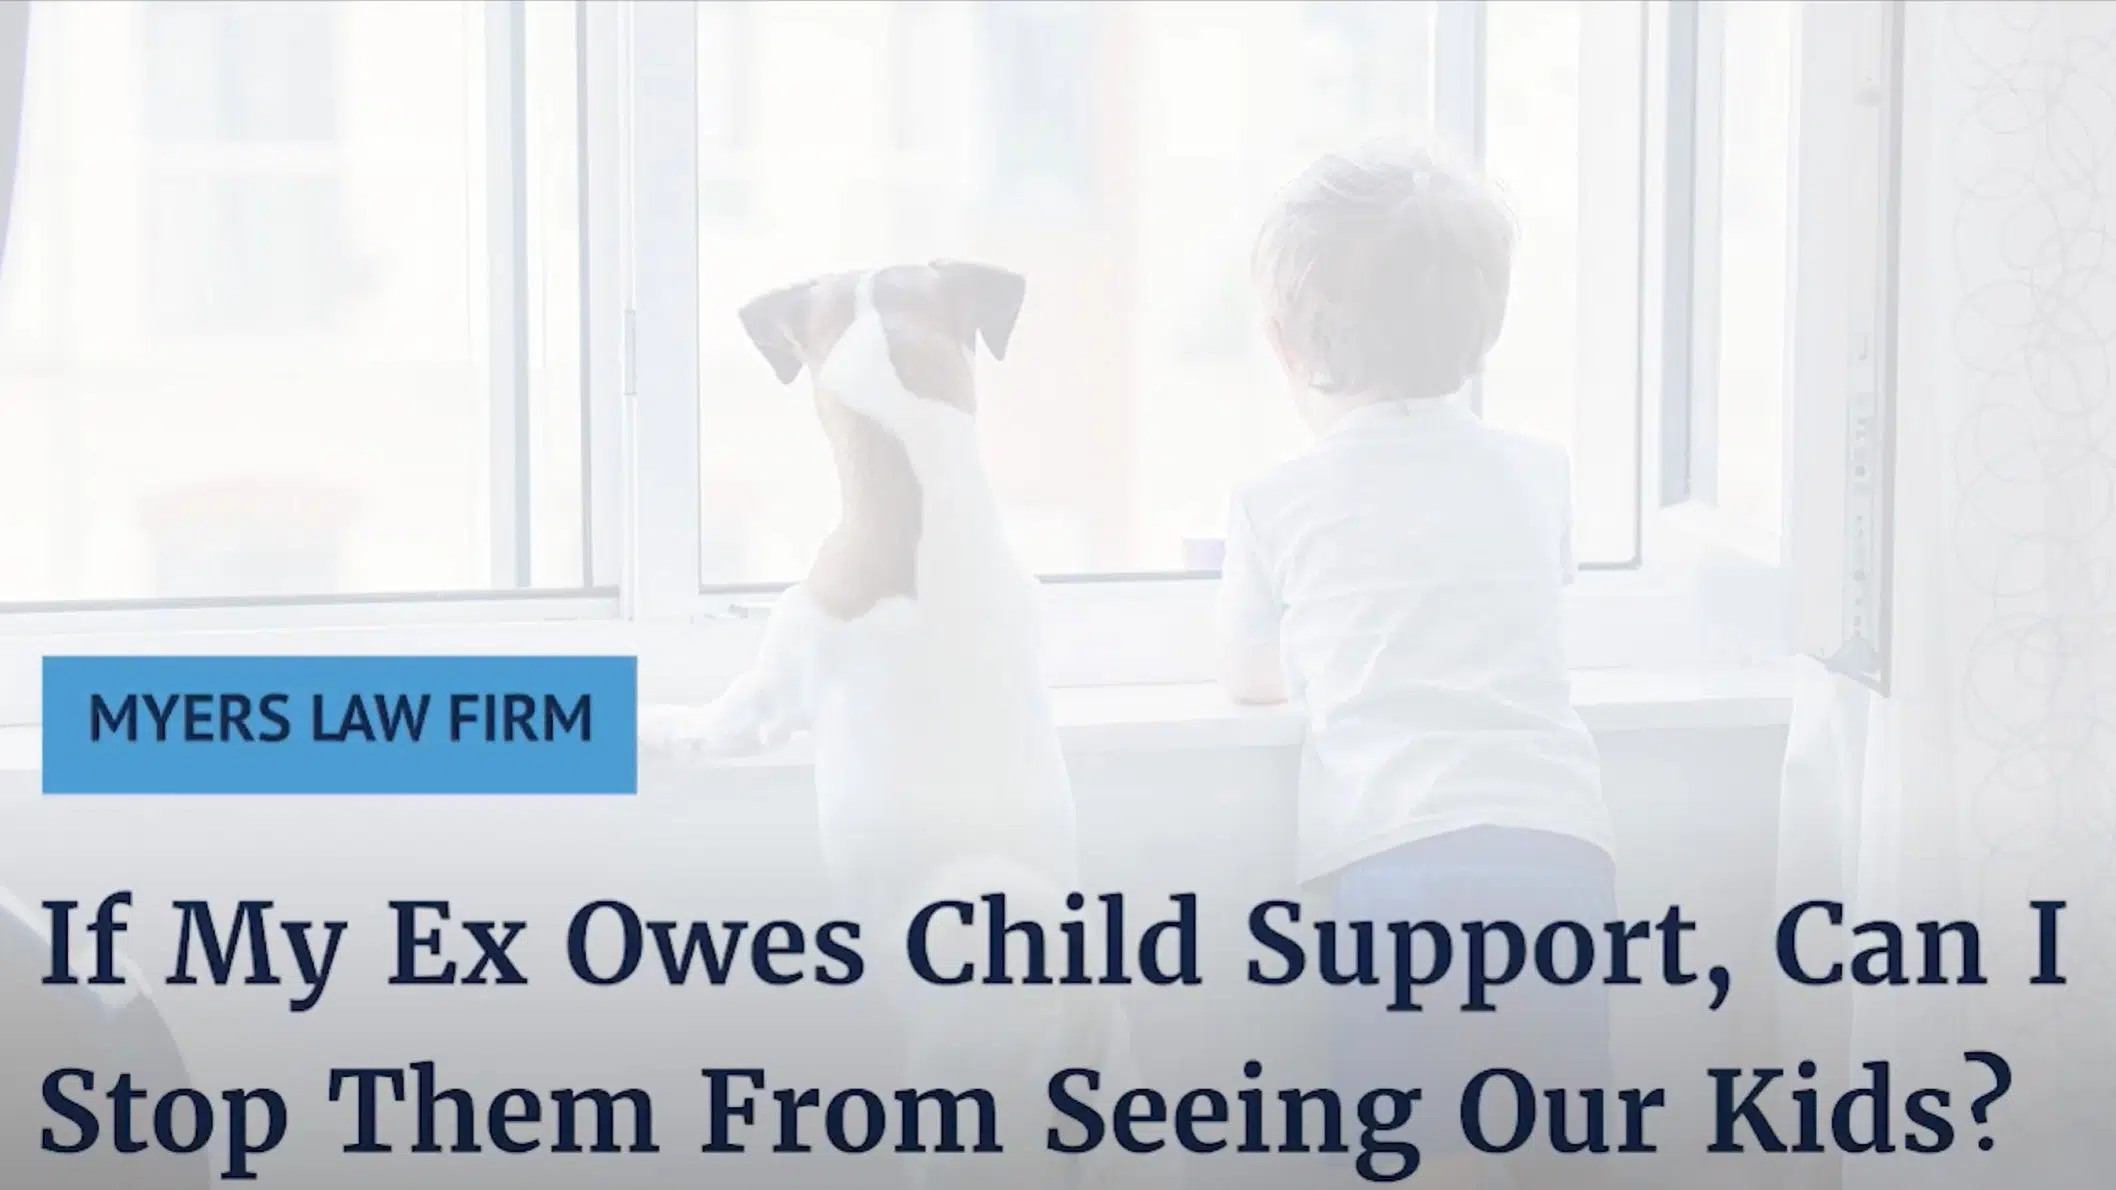 If My Ex Owes Child Support, Can I Stop Them From Seeing Our Kids?